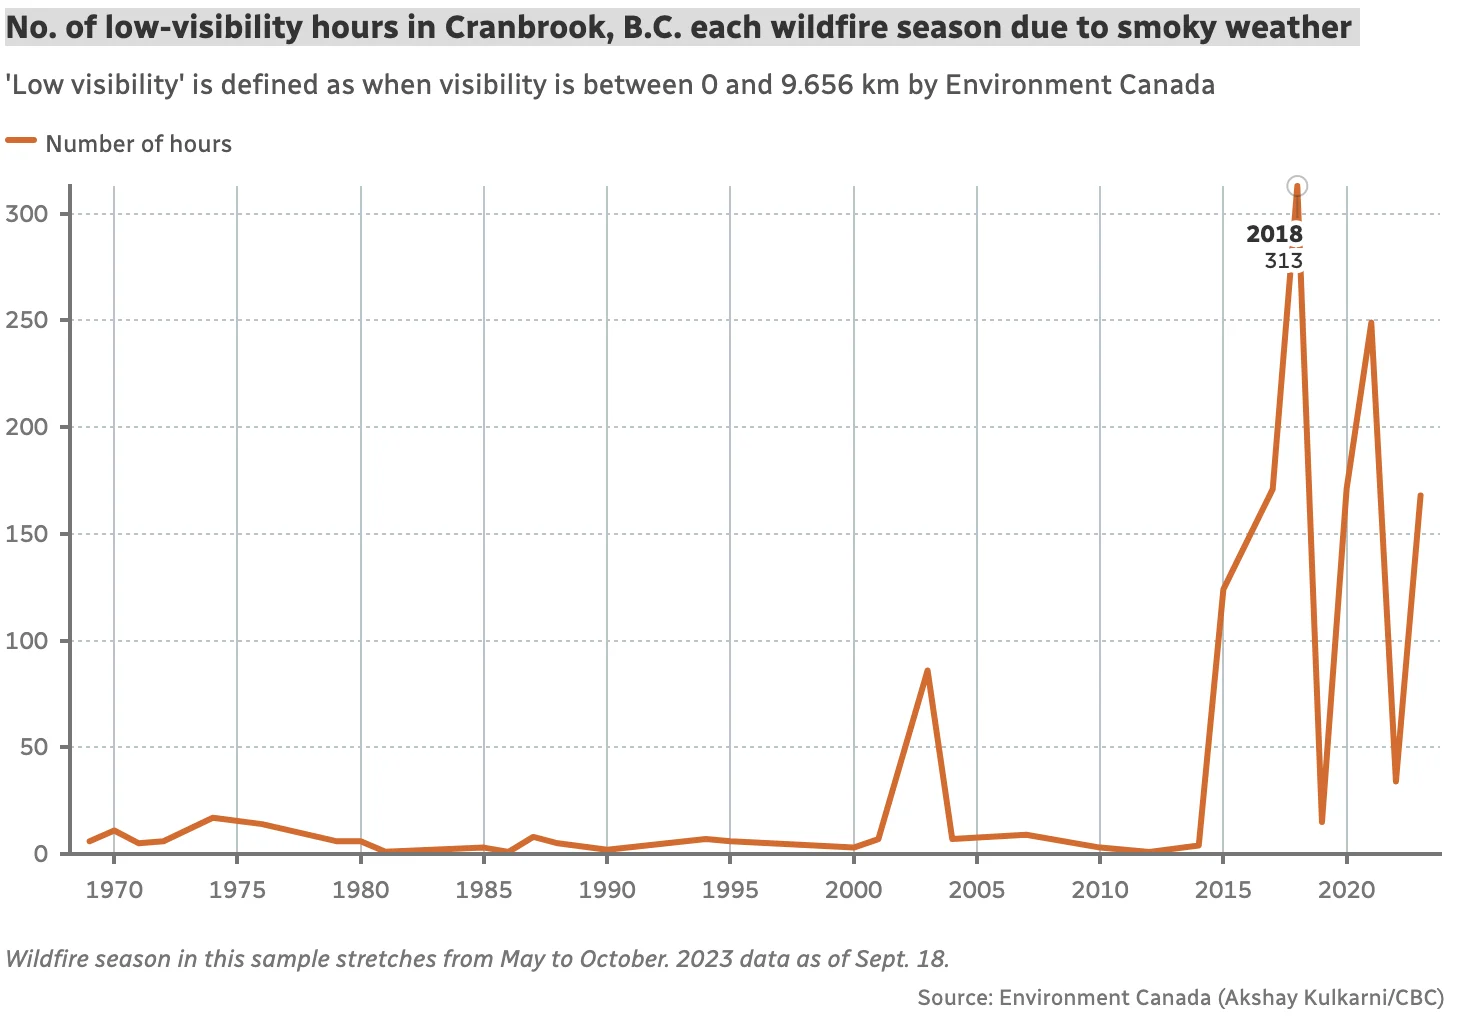 CBC: No. of low-visibility hours in Cranbrook, B.C. each wildfire season due to smoky weather